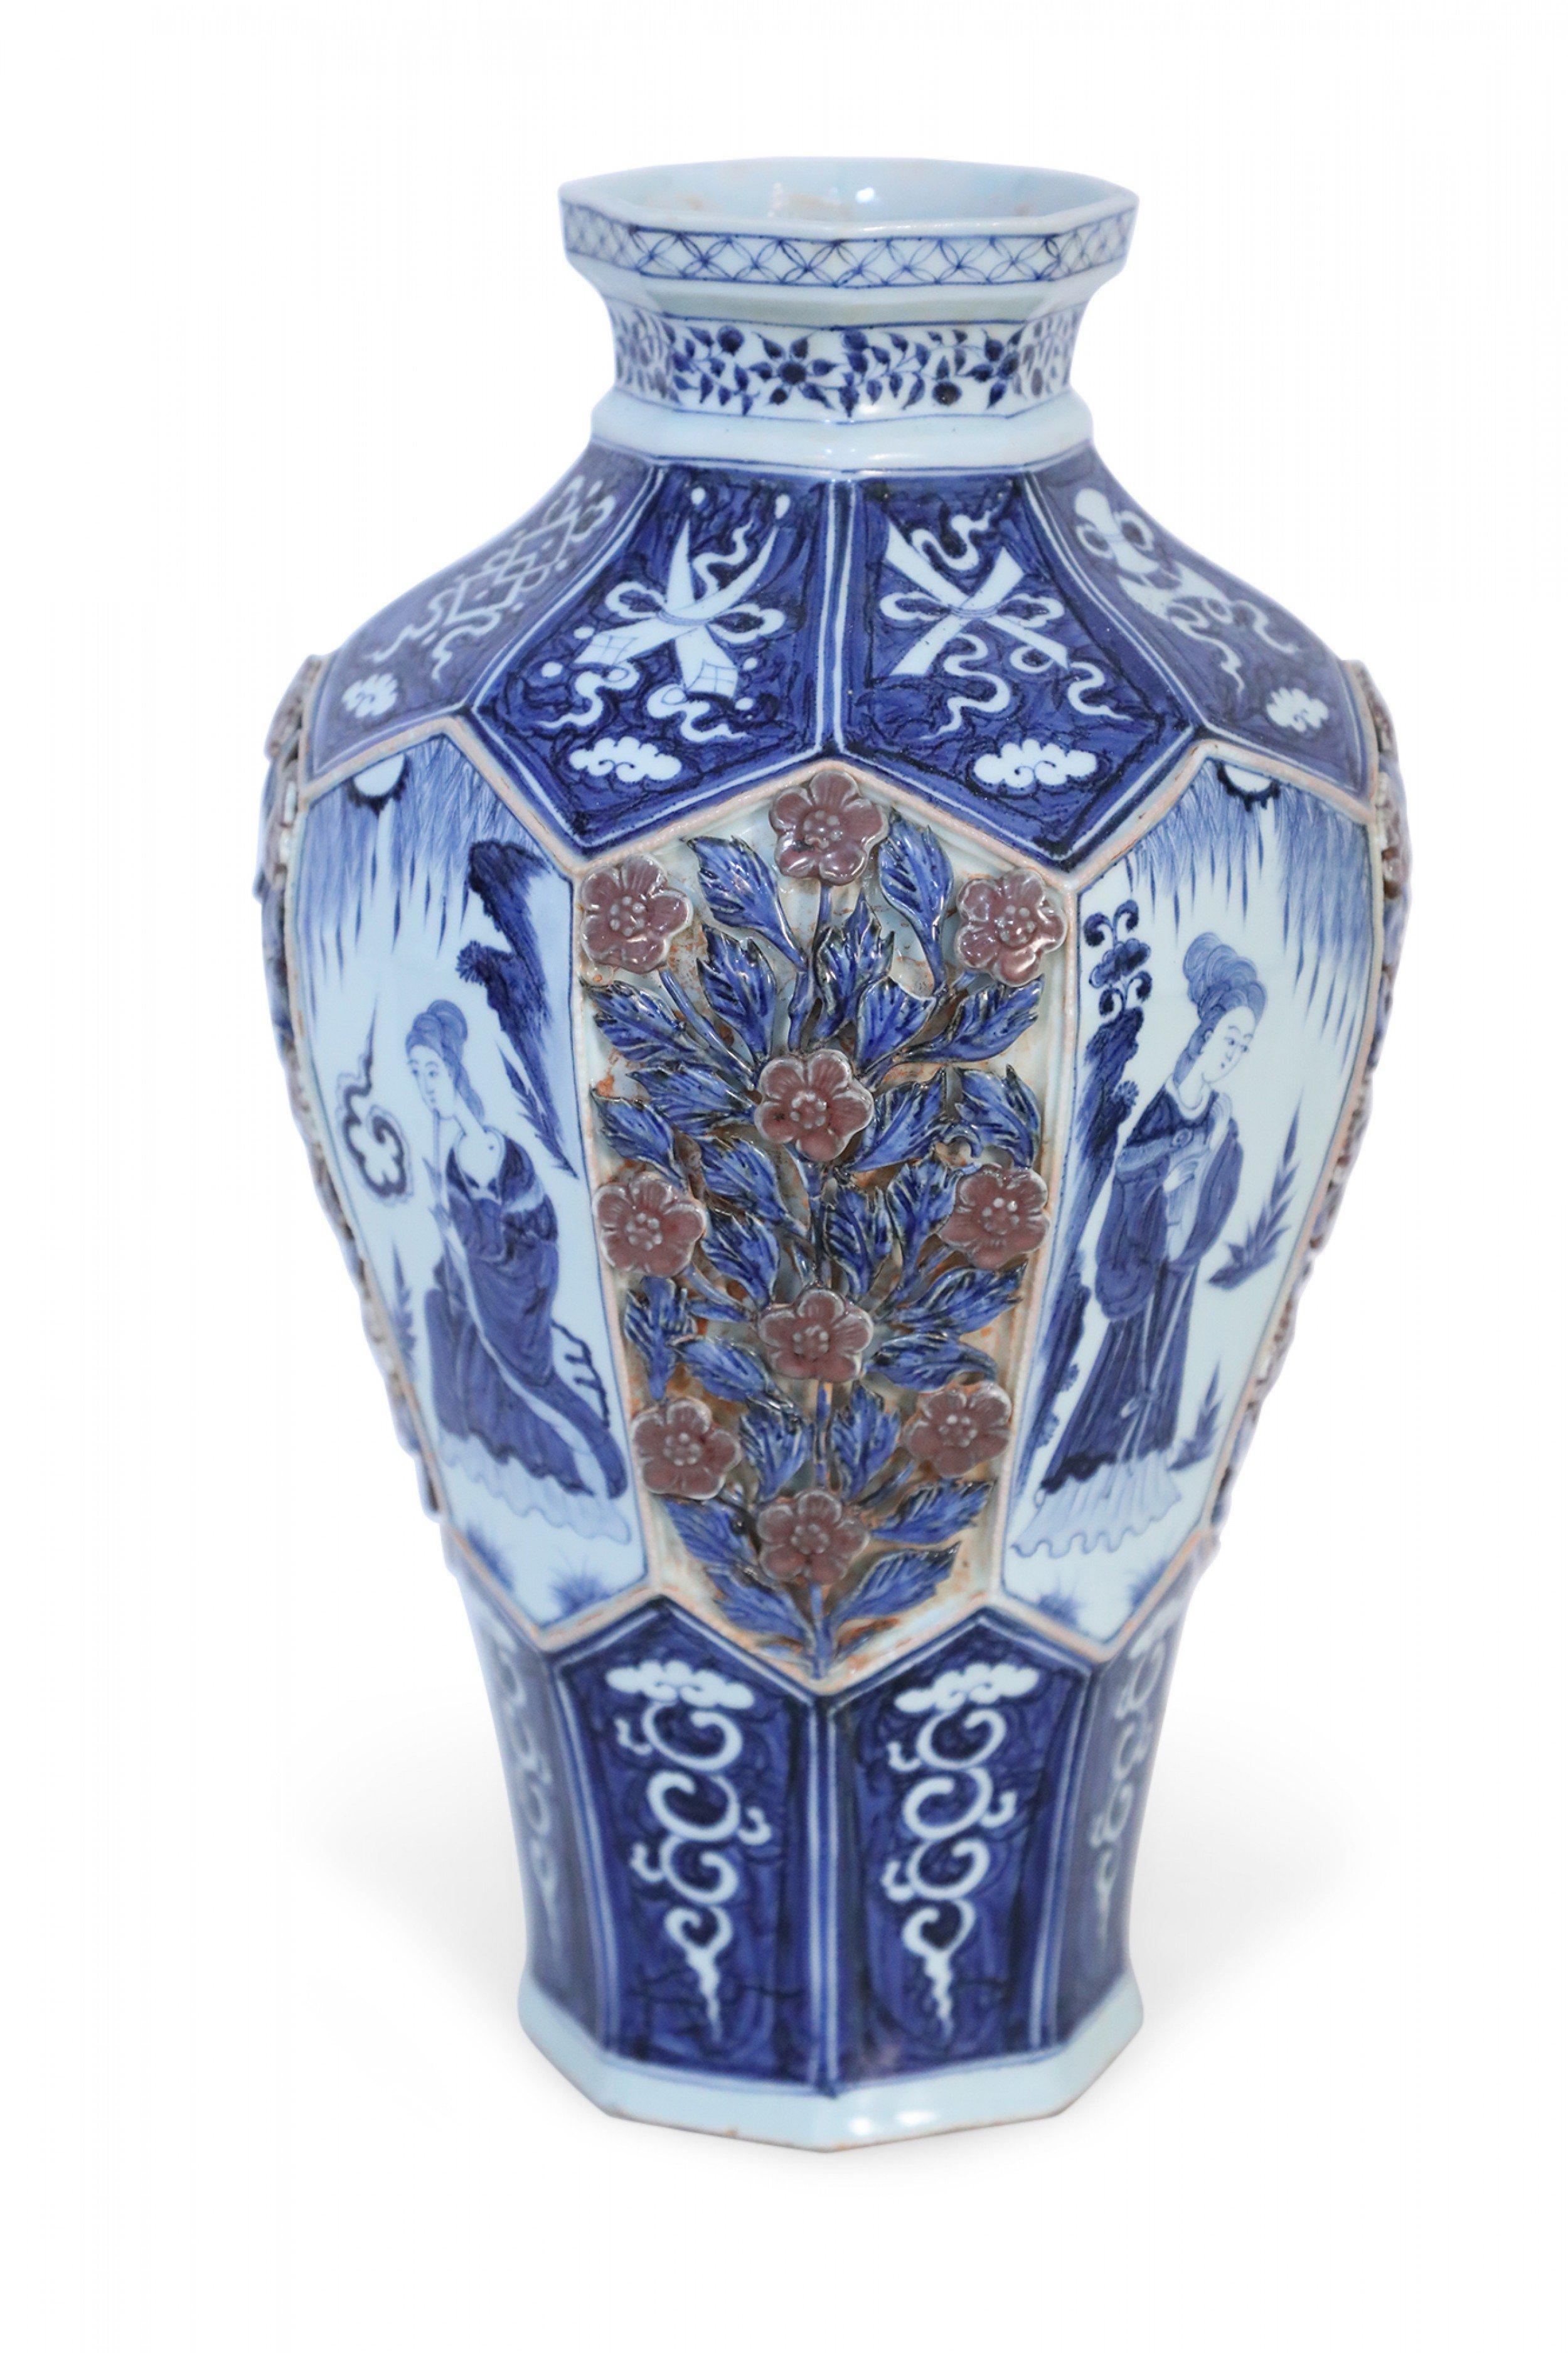 Chinese blue and white porcelain vase with an octagonal, faceted shape wrapped in blue bands featuring white iconography at the base and concave top, framing a center area that alternates figurative vignette panels with raised, pierced roses amid